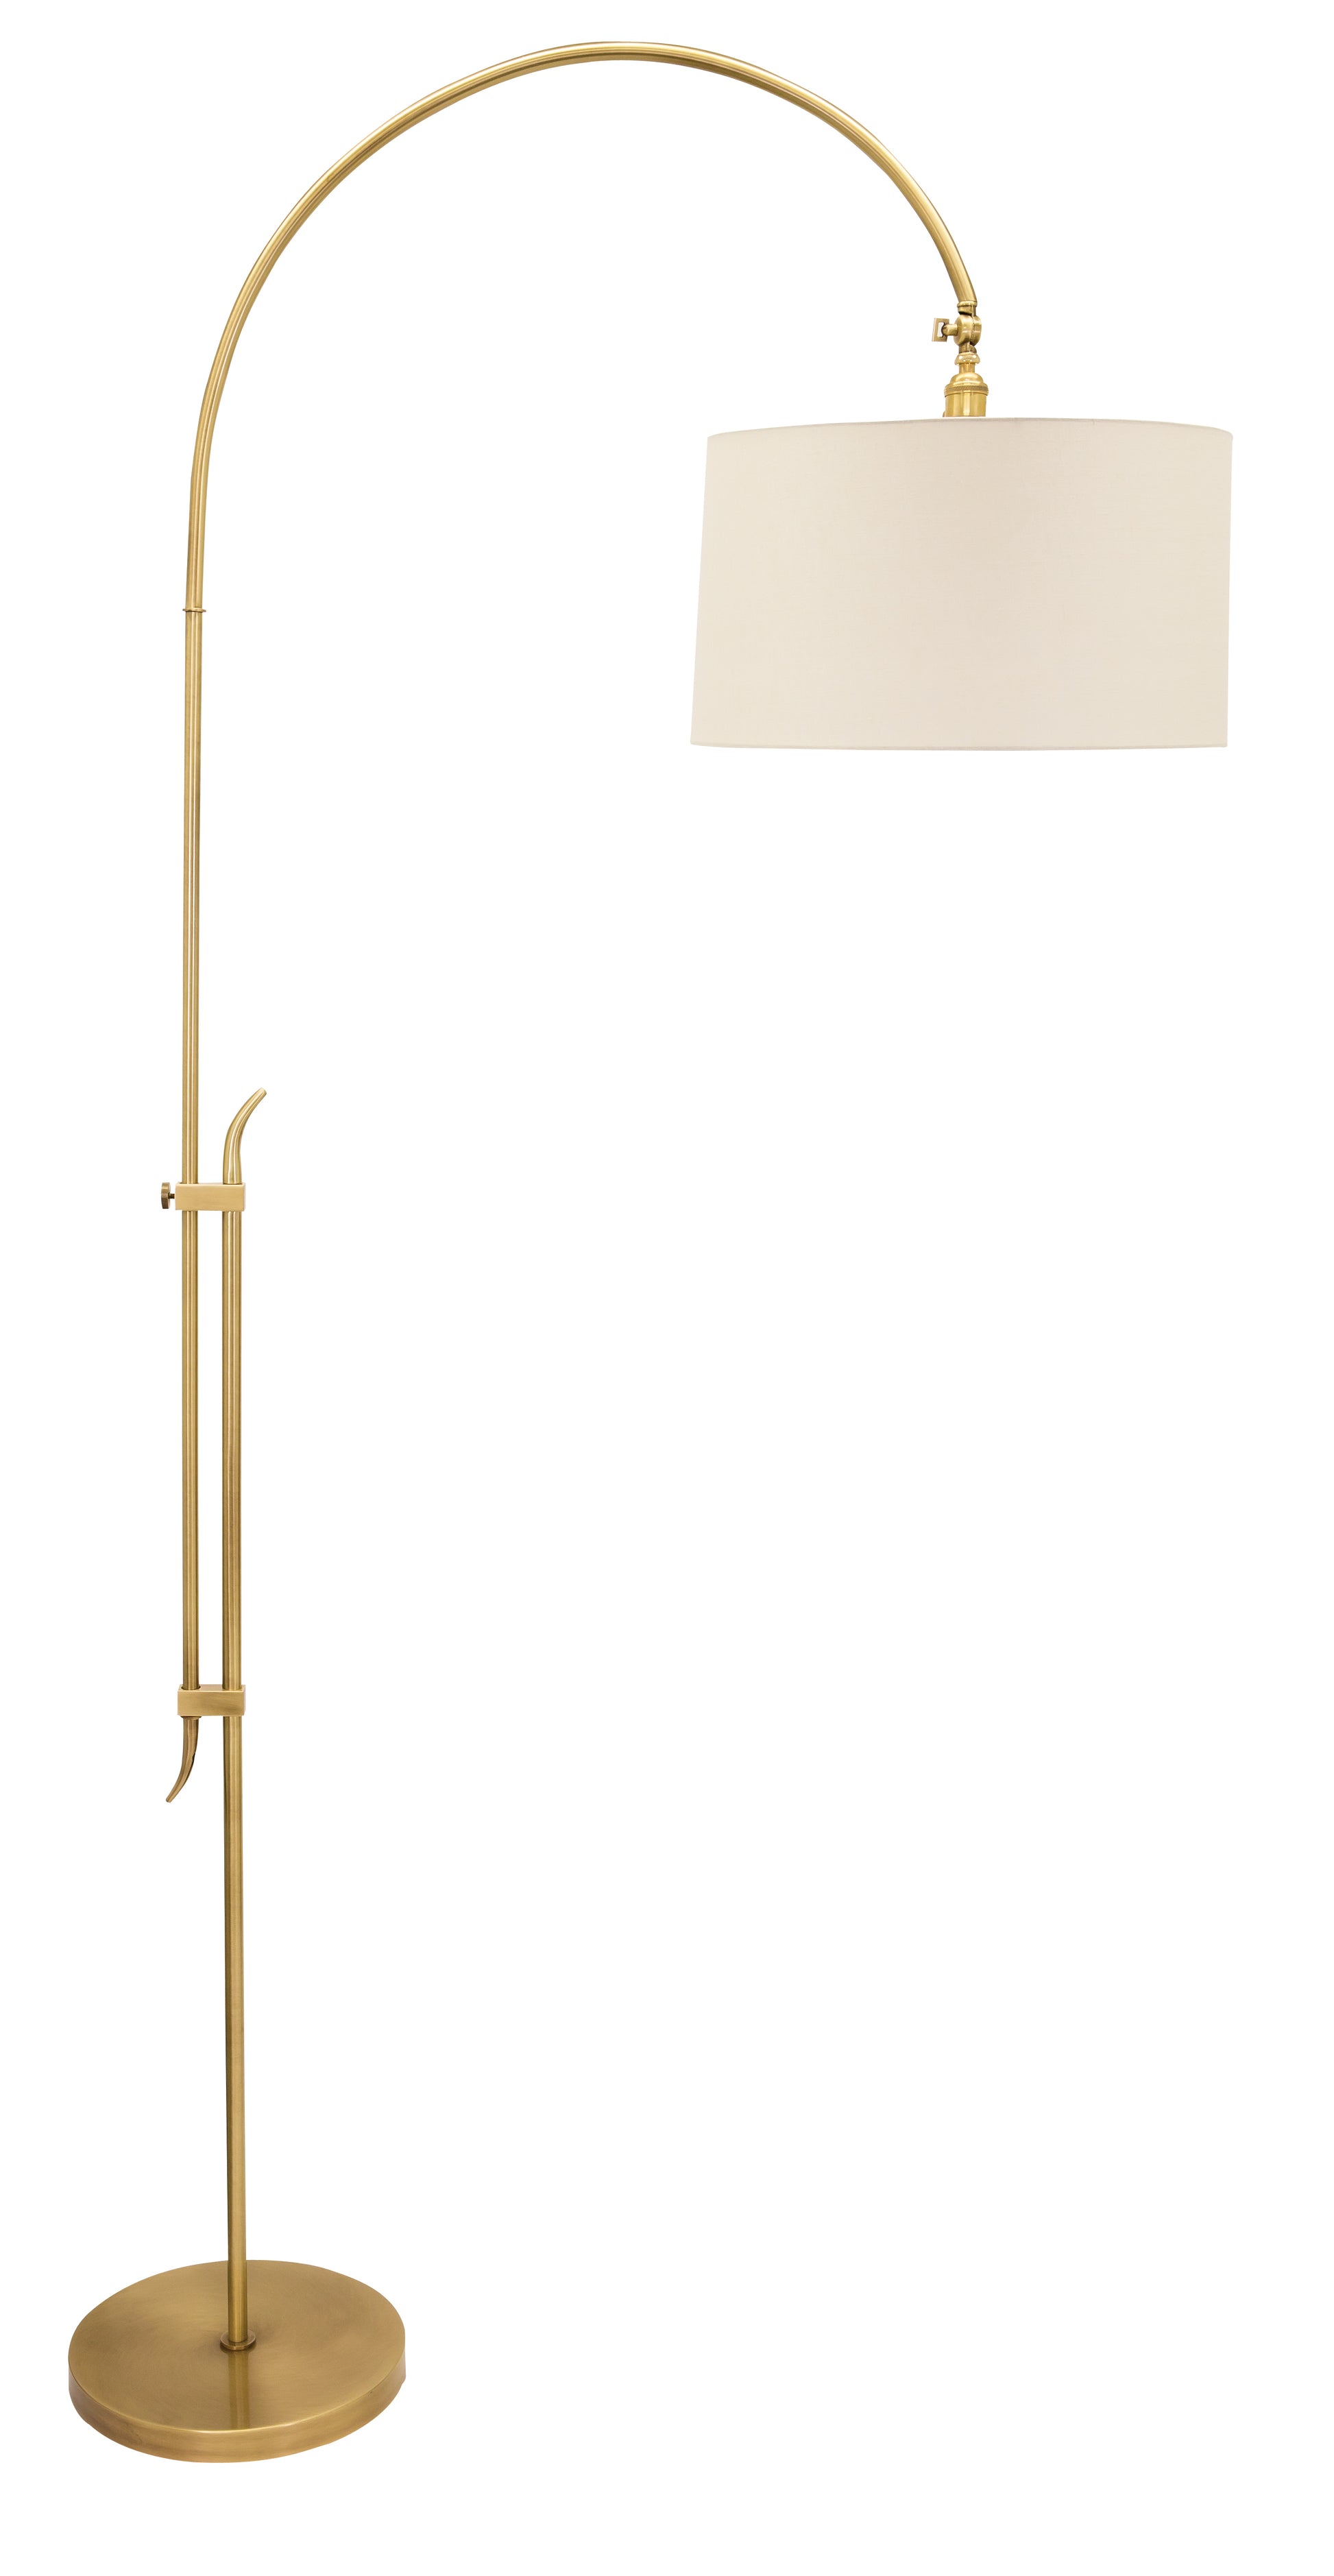 House of Troy 84" Windsor Adjustable Floor Lamp in Antique Brass W401-AB